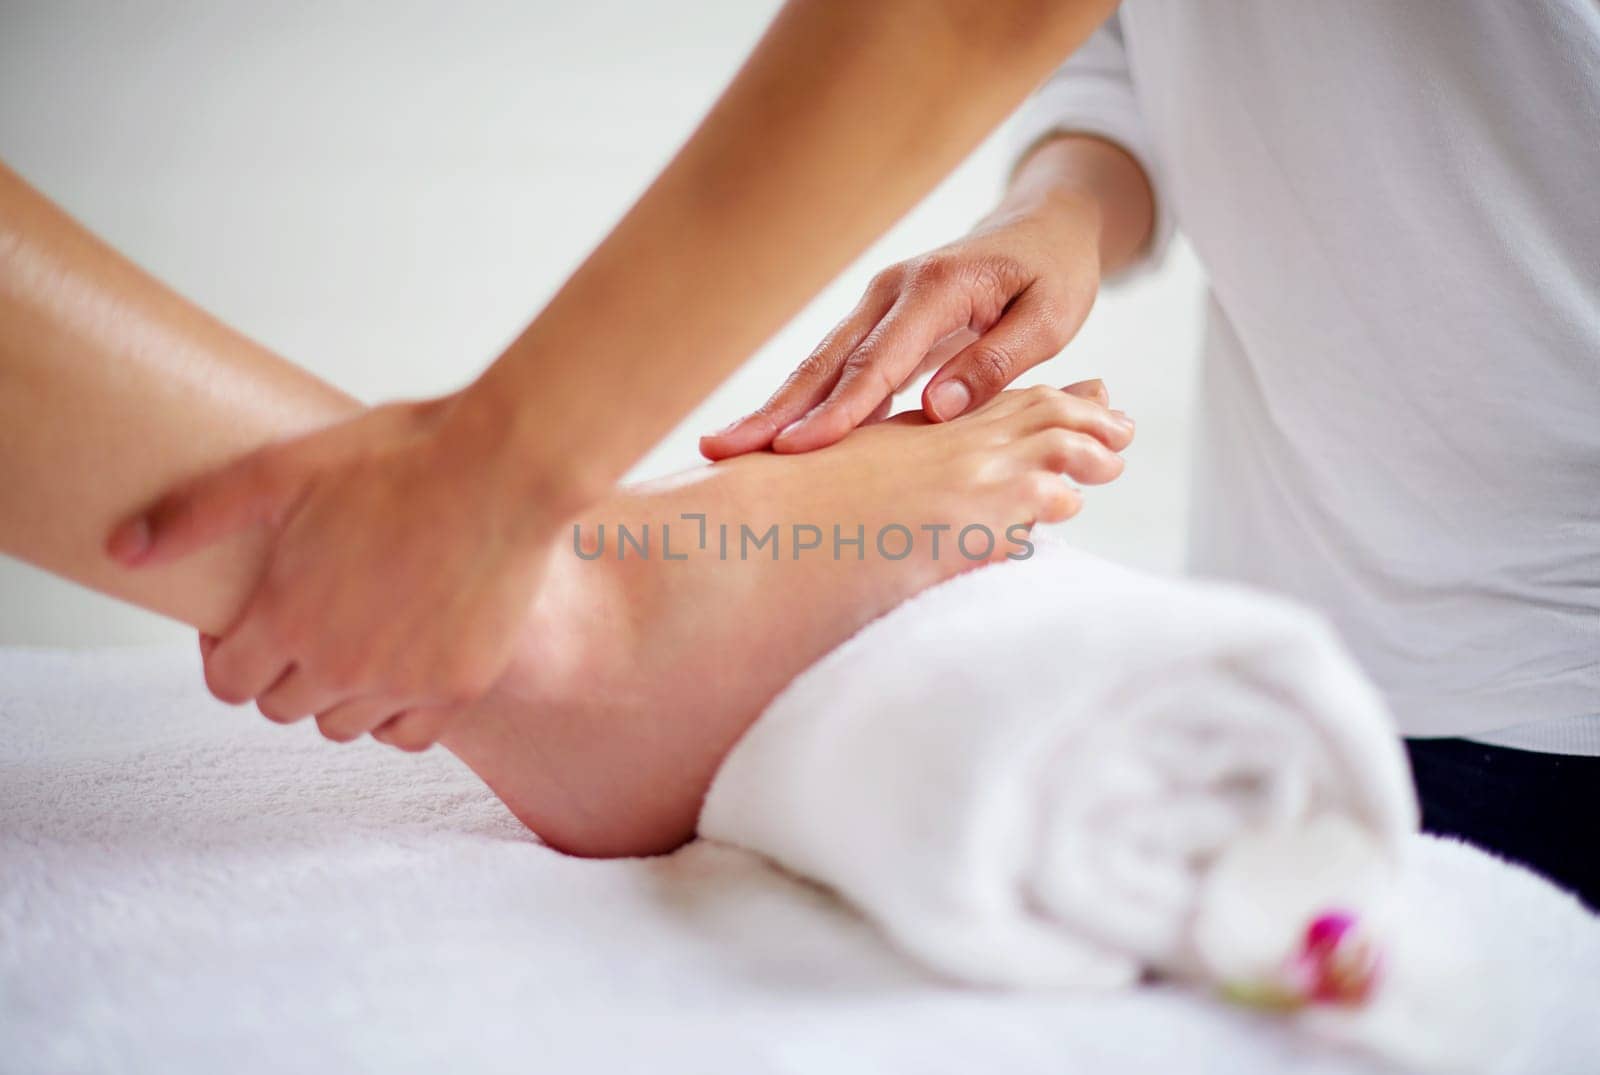 Foot, hands and pressure massage with spa for treatment, beauty and skincare at luxury resort with wellness. Pedicure, cosmetics and people for physical therapy with healing for self care and relief.